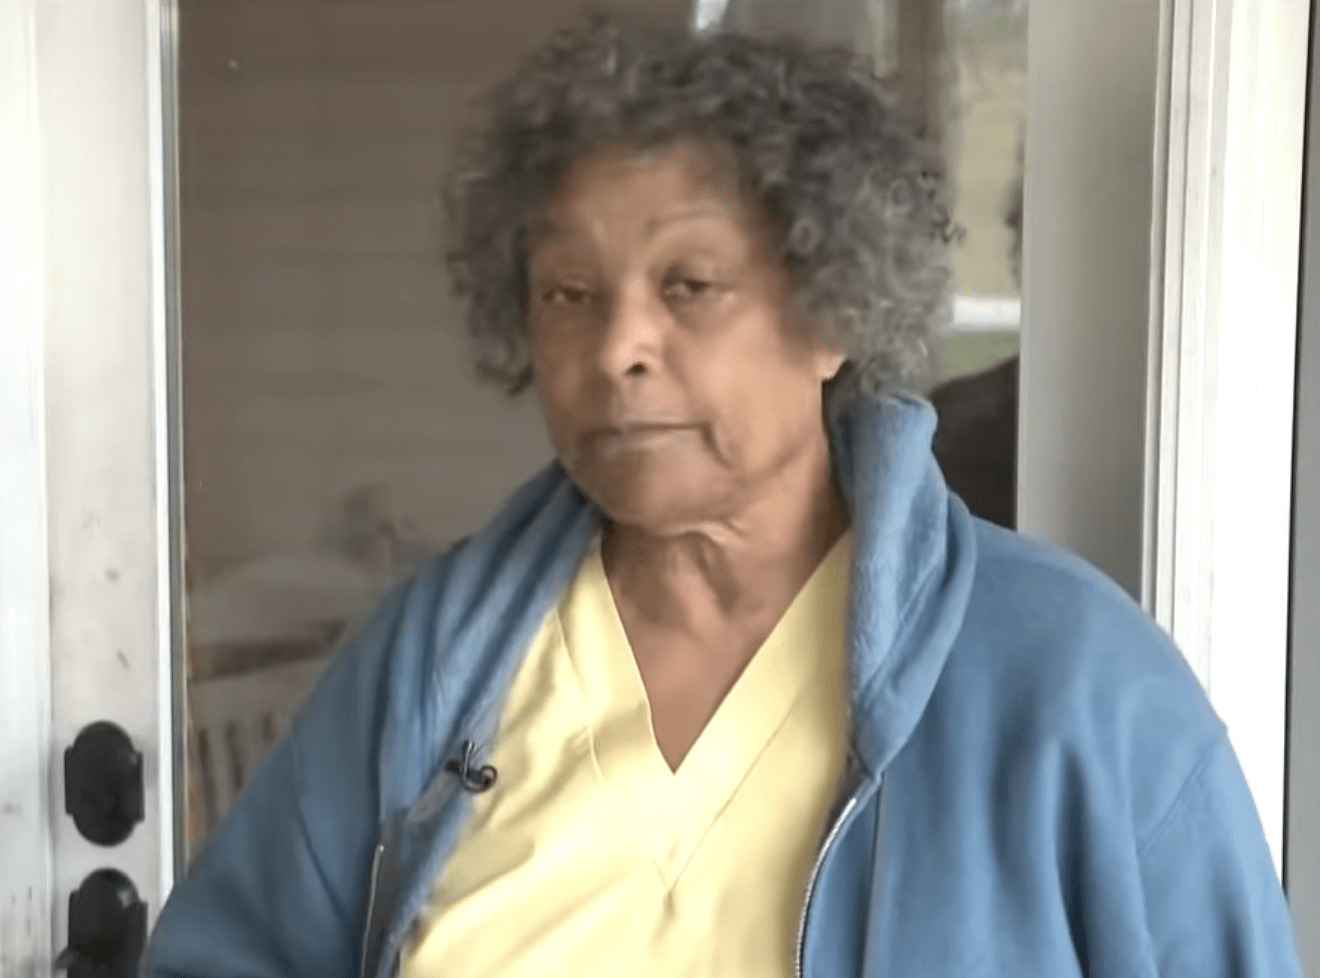 Burglar breaks into 79-year-old woman’s home and realizes he picked the wrong grandma to mess with